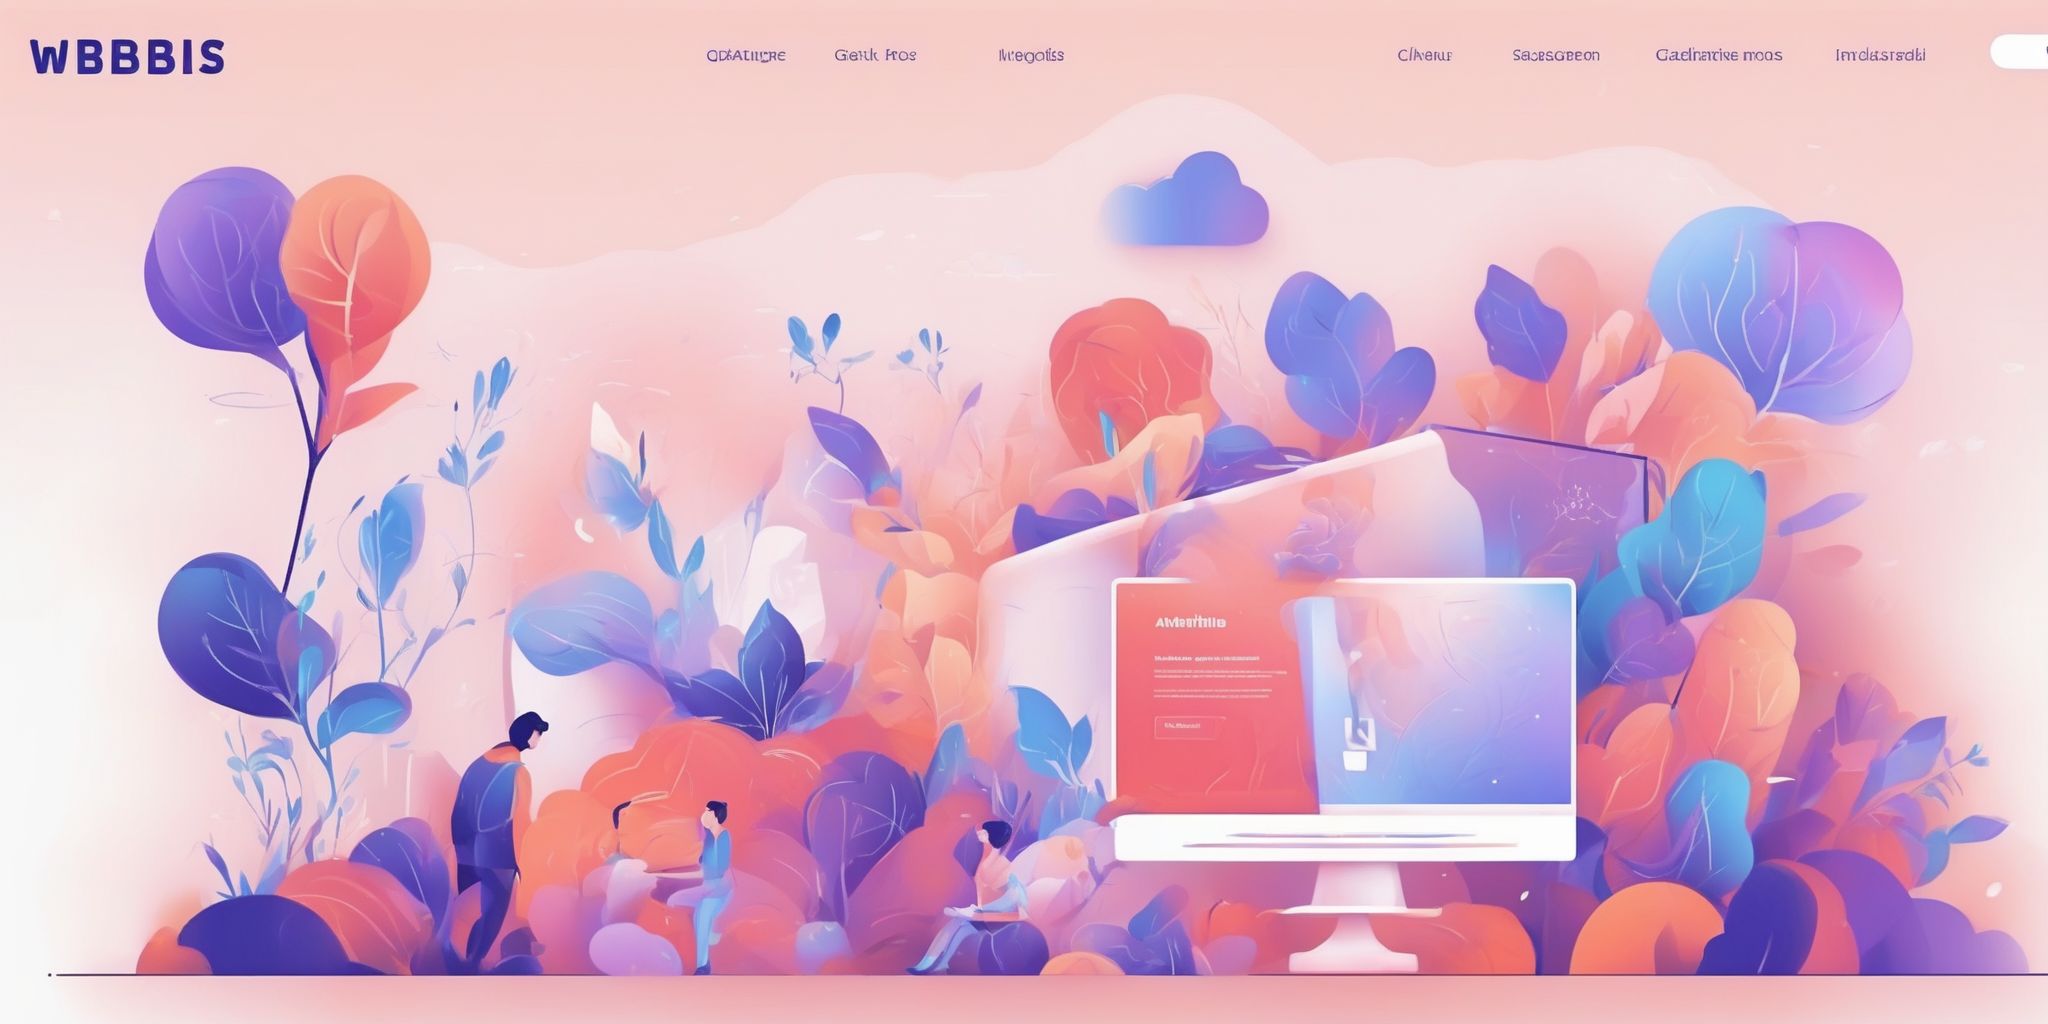 Website in illustration style with gradients and white background